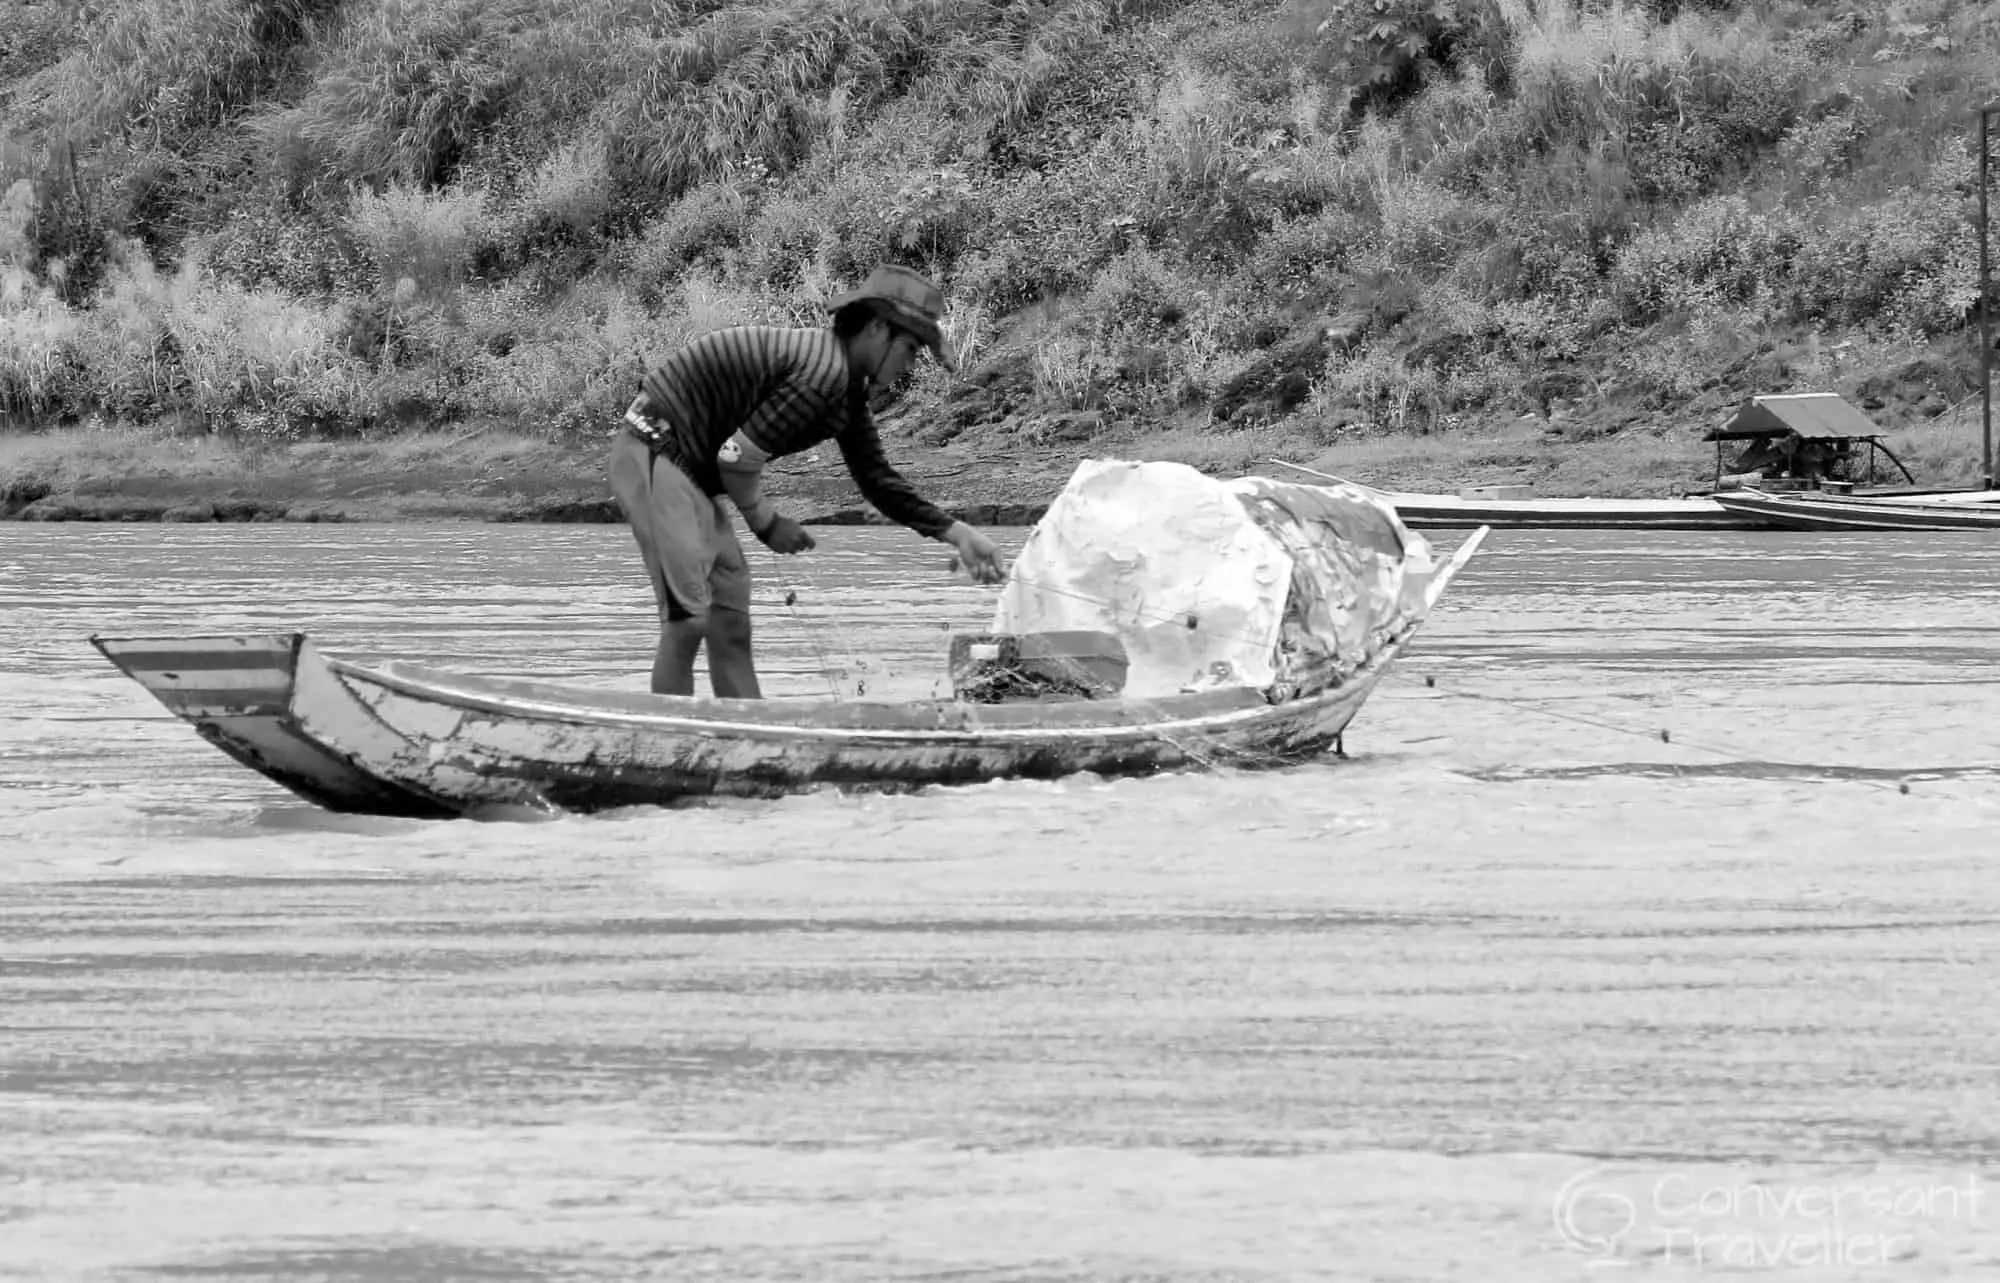 Fisherman hunting for dinner on the mightly Mekong,Laos